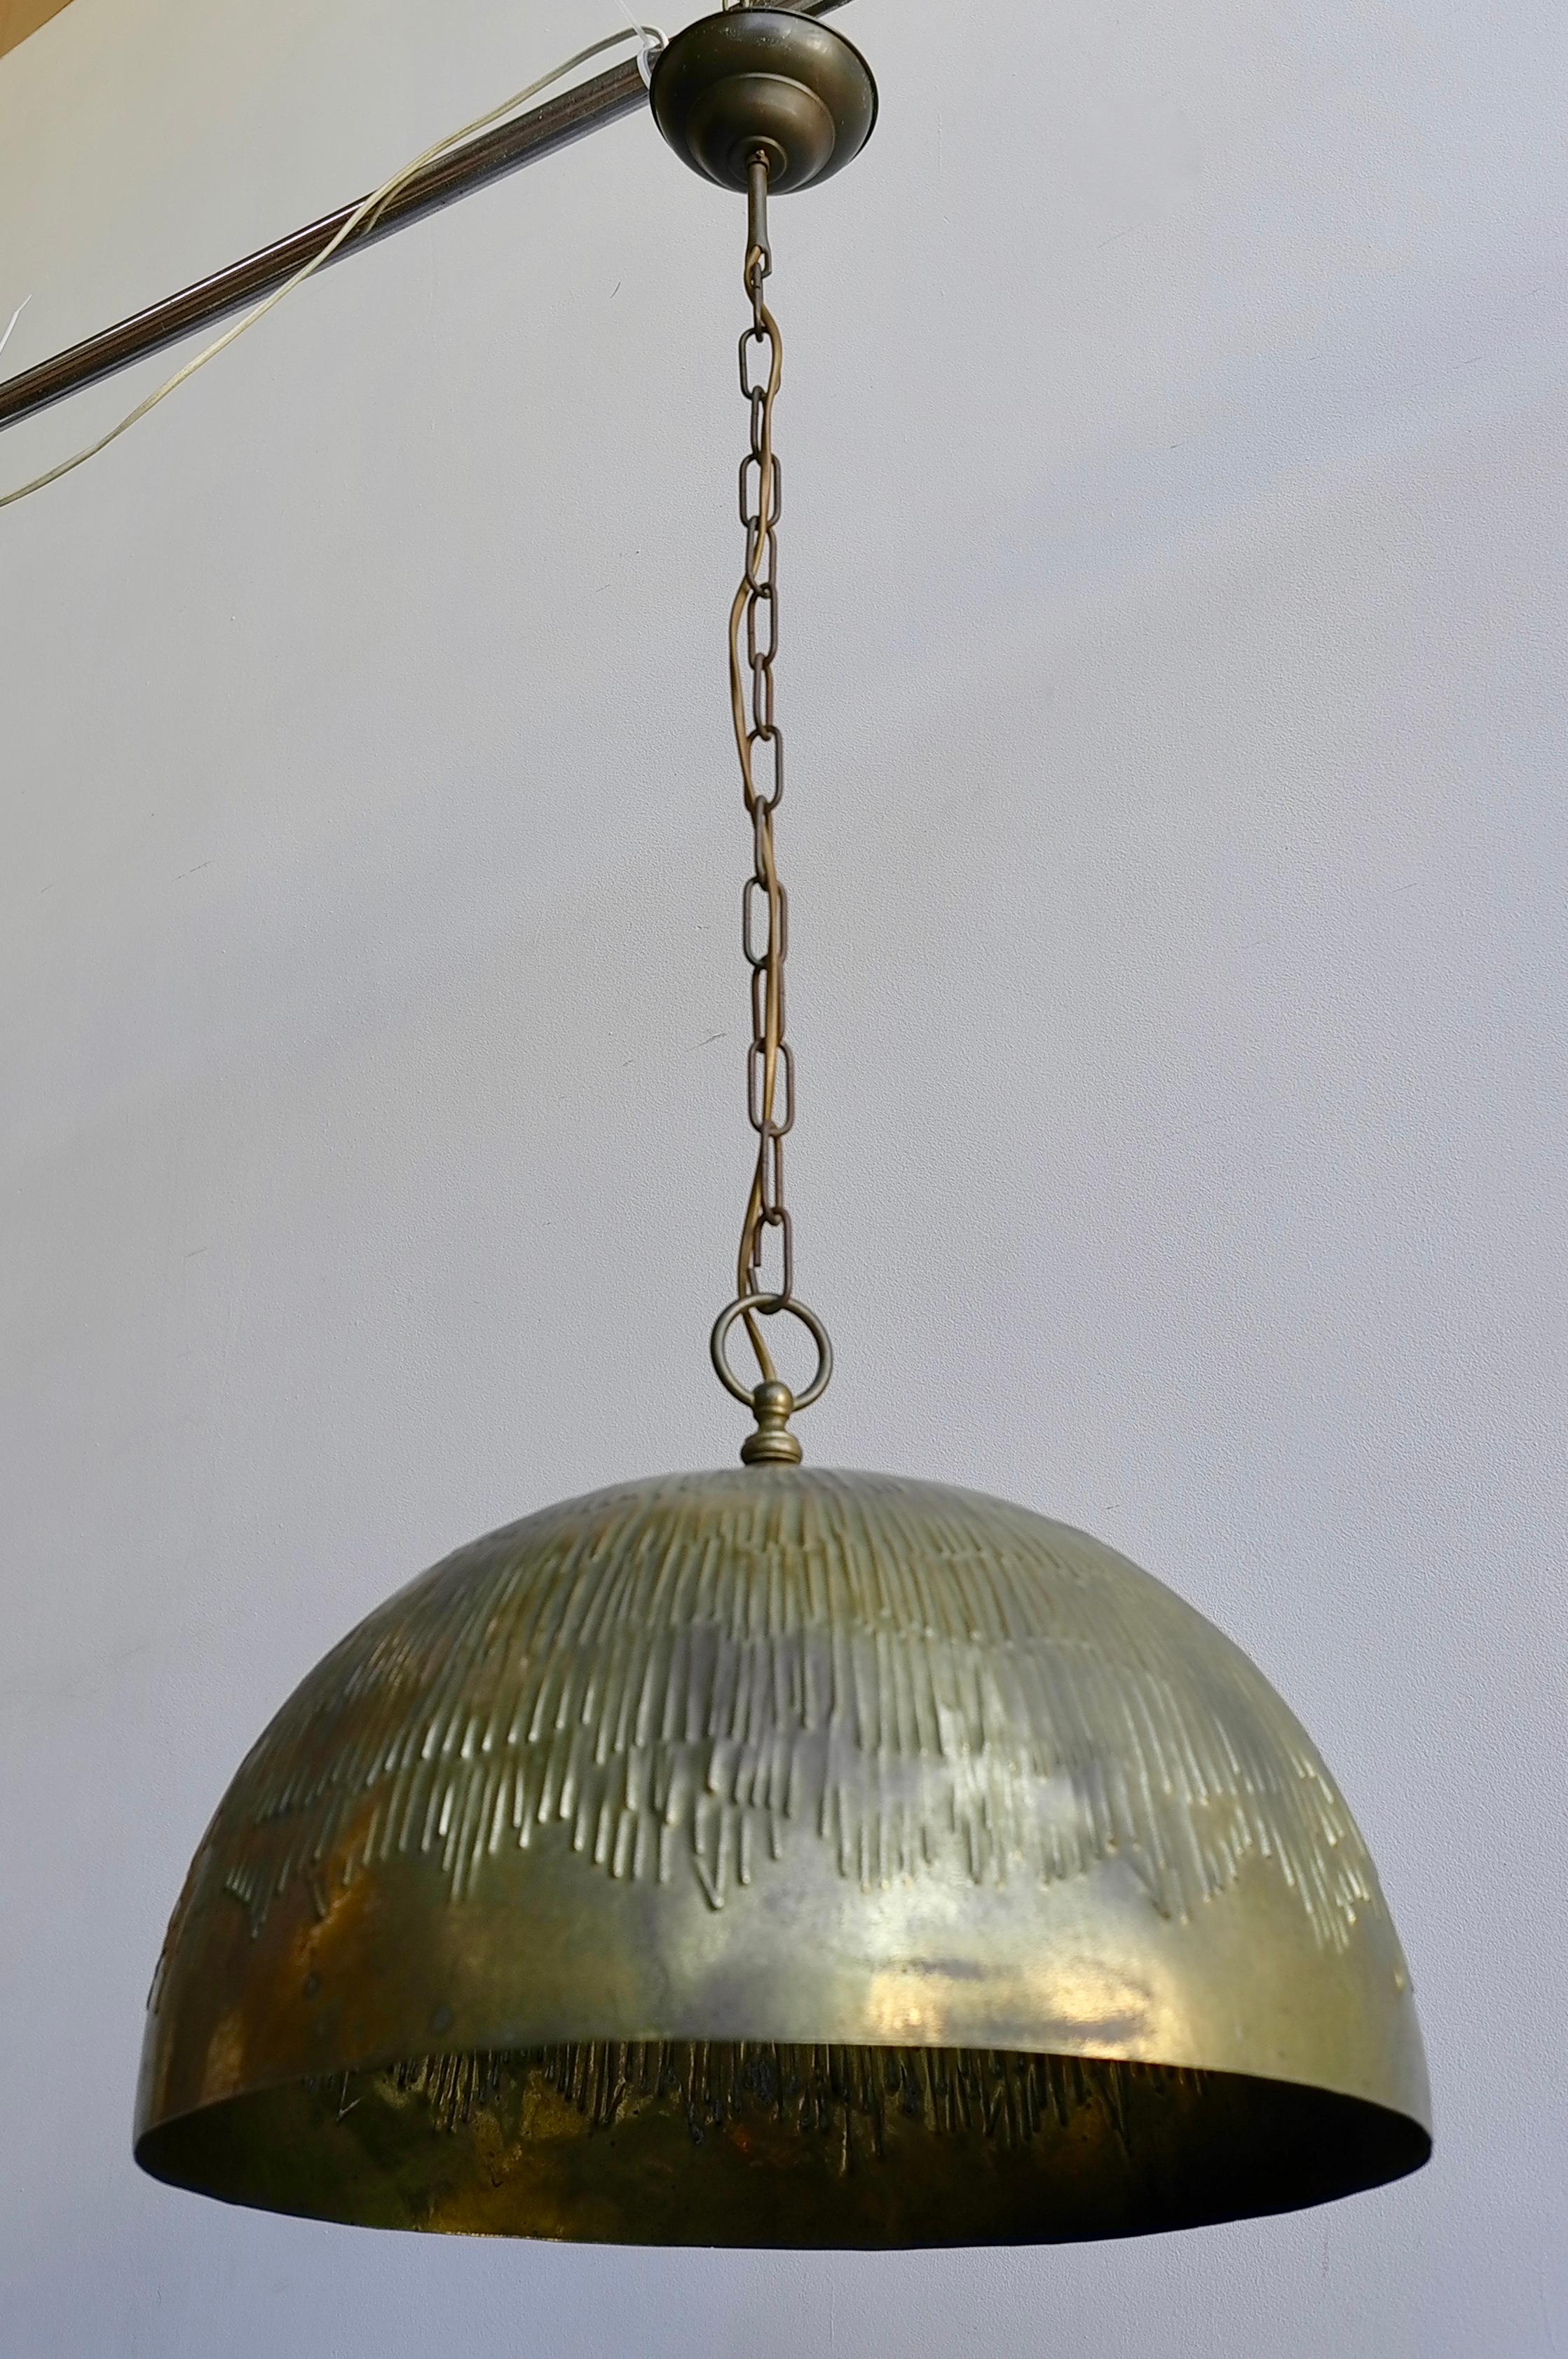 Brass Svend Aage Holm Sorensen Pendant Lamp in Copper for Holm Sorensen and Company For Sale